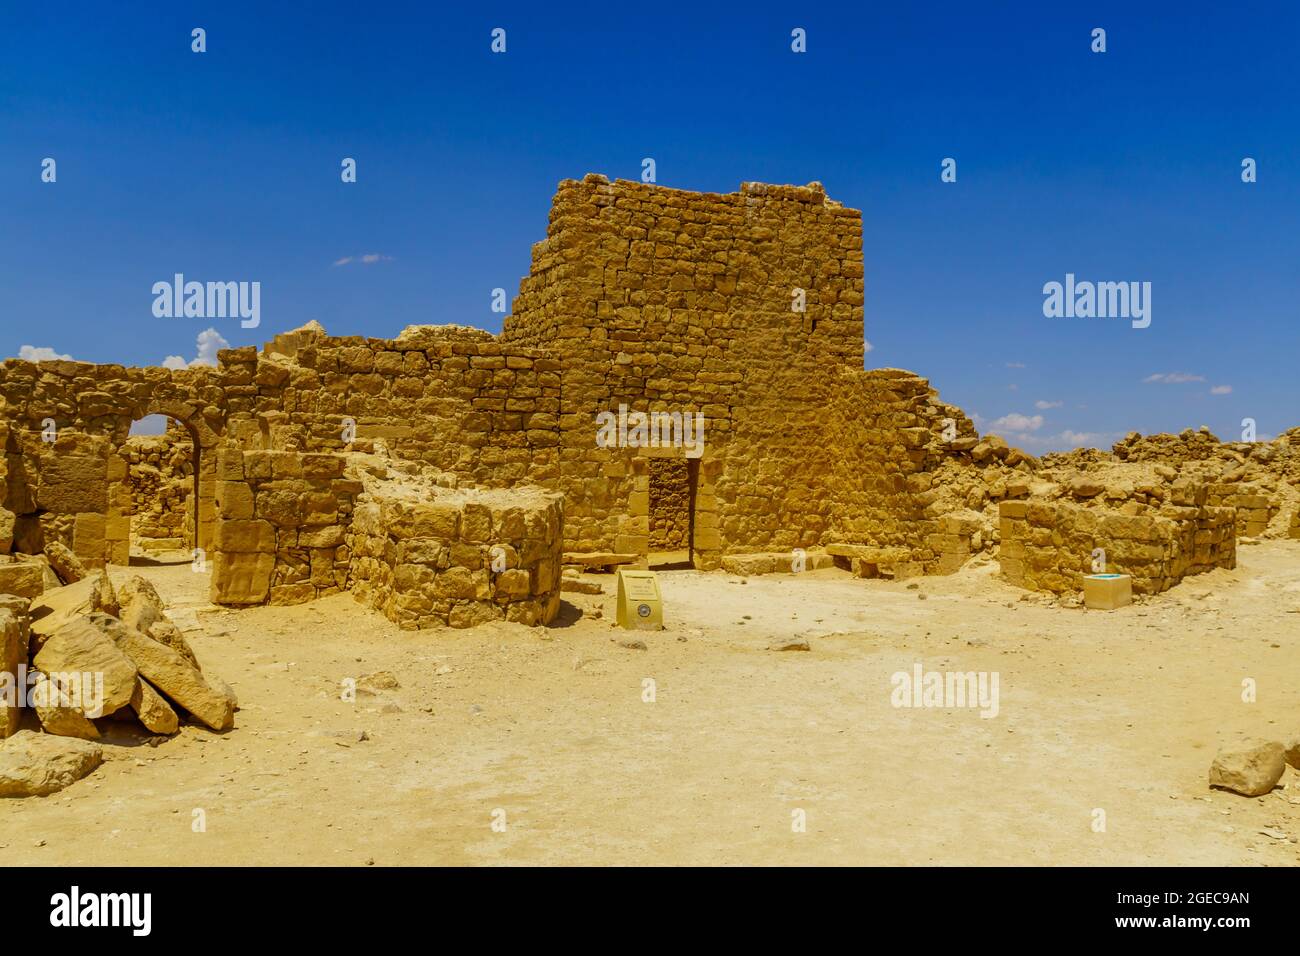 Shivta, Israel - August 12, 2021: View of the ruined governor building in the ancient Nabataean city of Shivta, now a national Park, in the Negev Dese Stock Photo